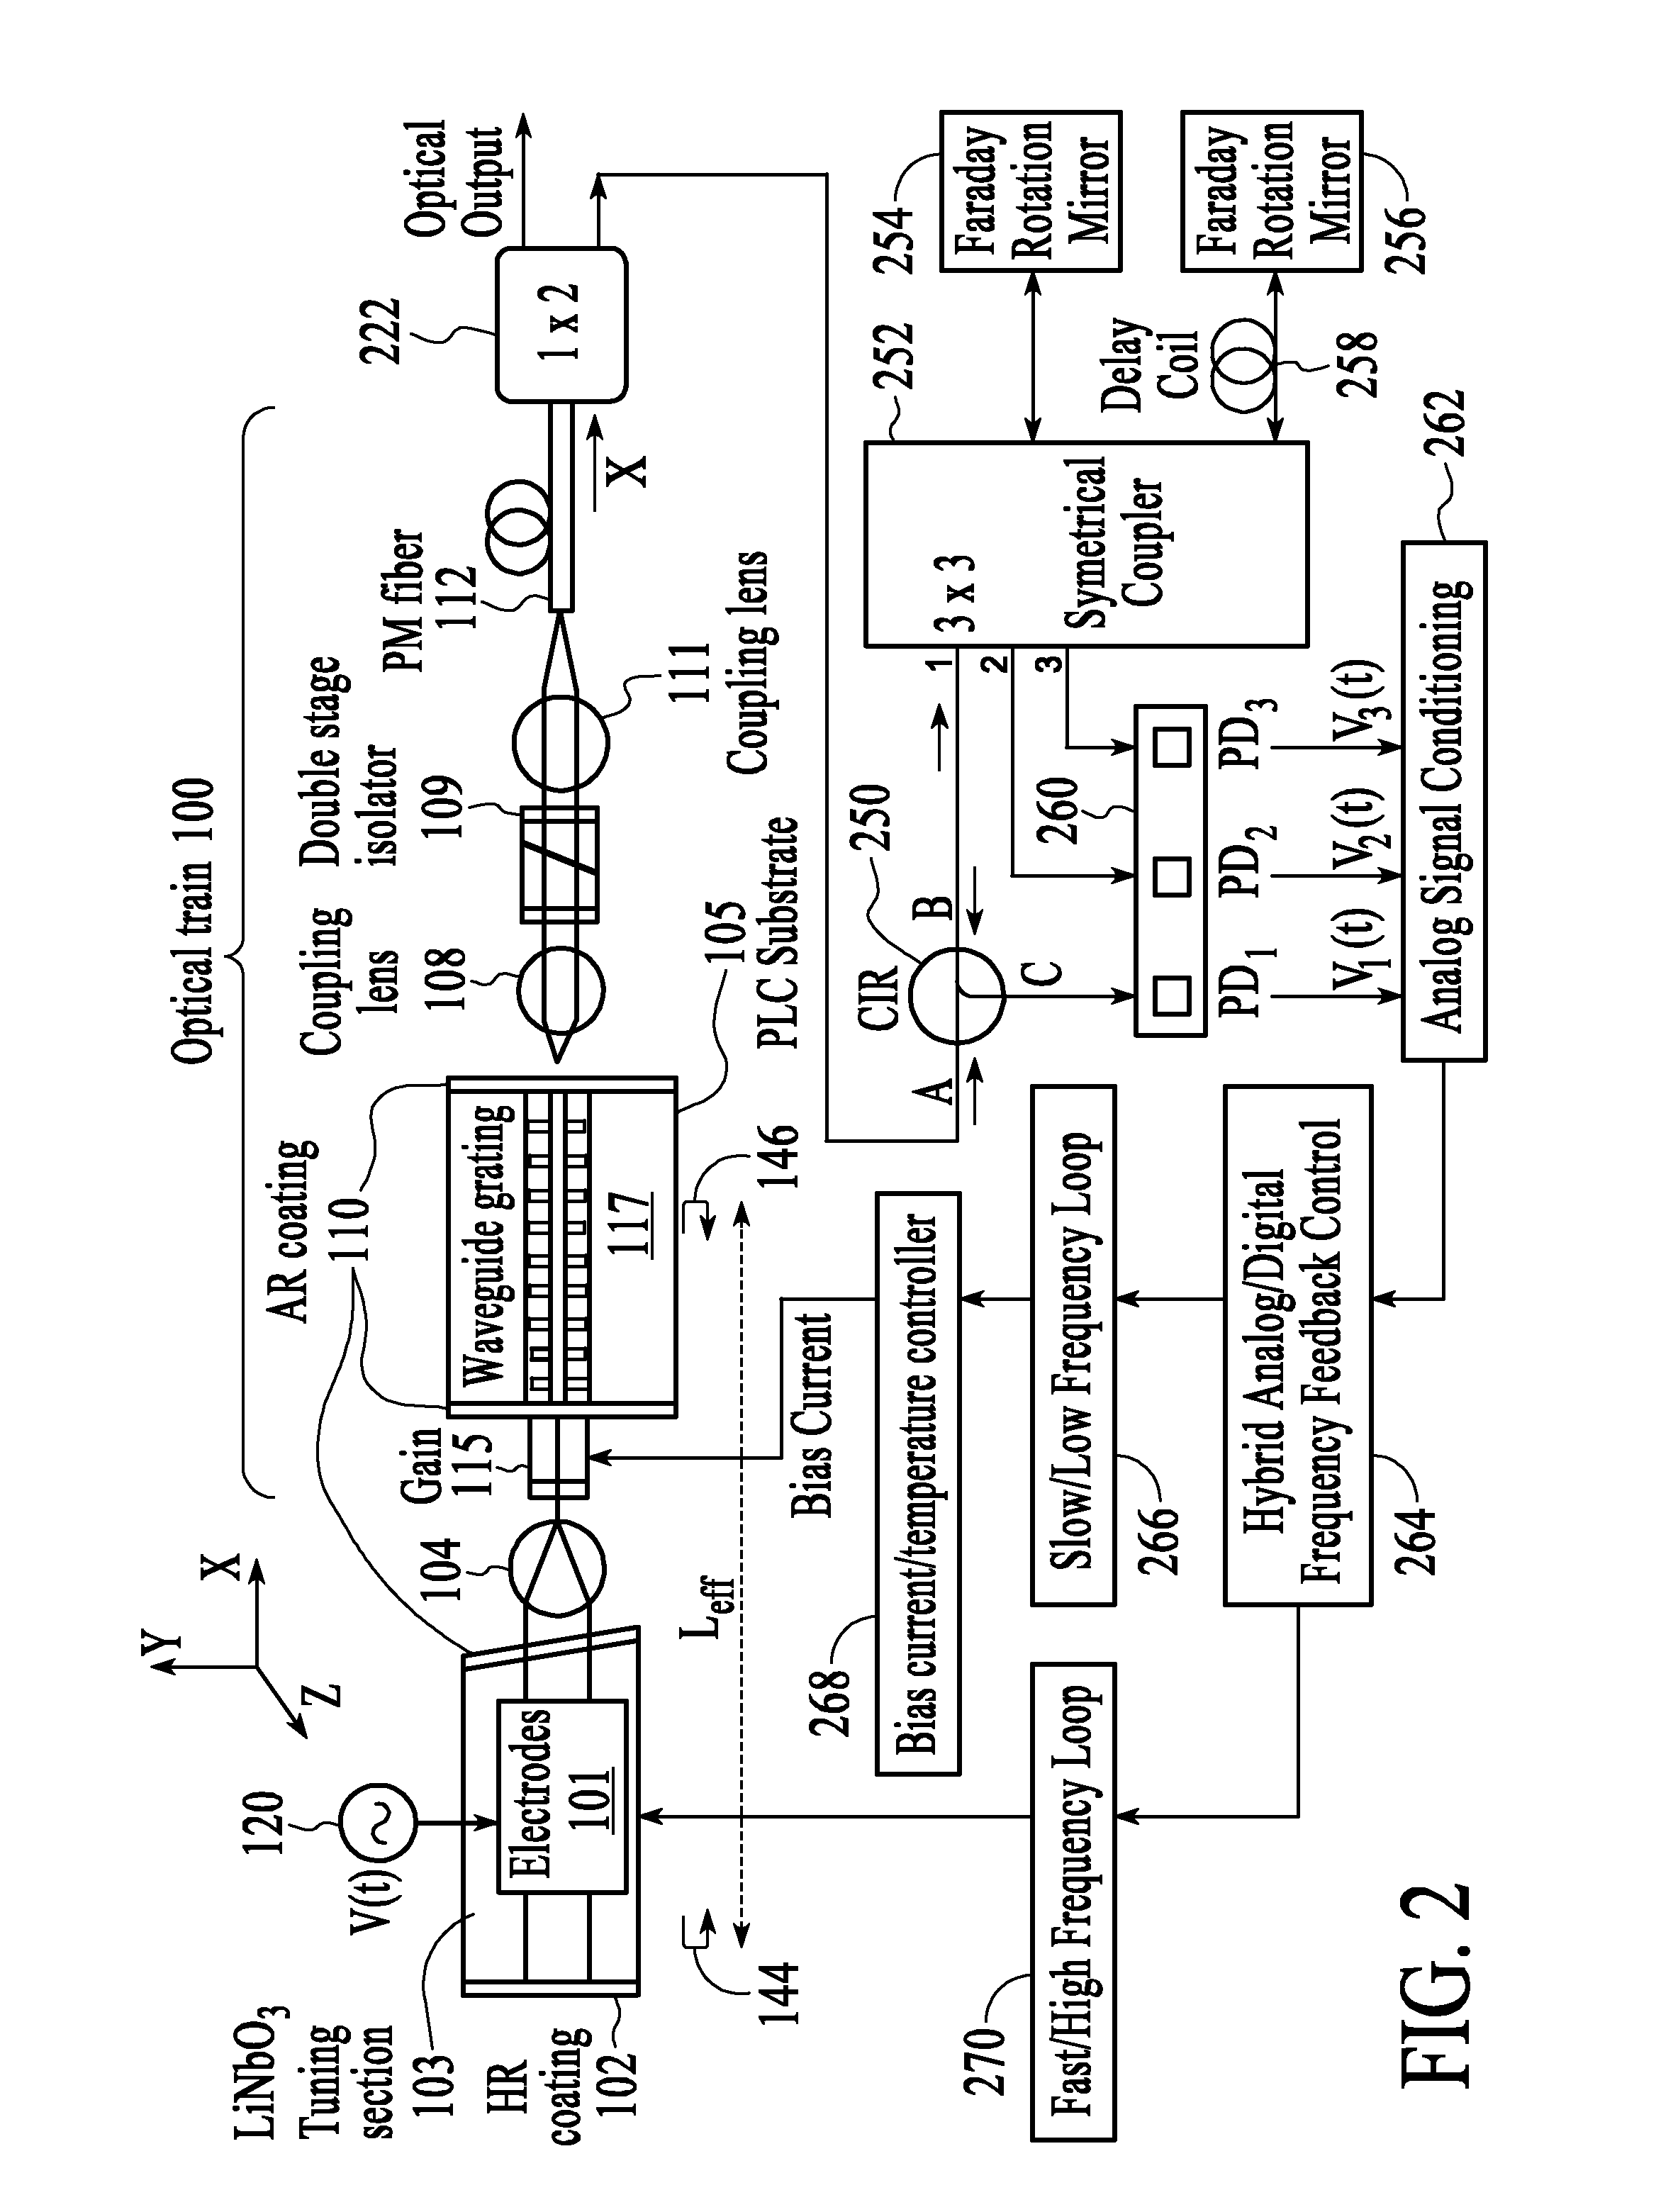 Ultra-low frequency noise external cavity semiconductor laser with integrated waveguide grating and modulation section electronically stabilized by dual frequency feedback control circuitry